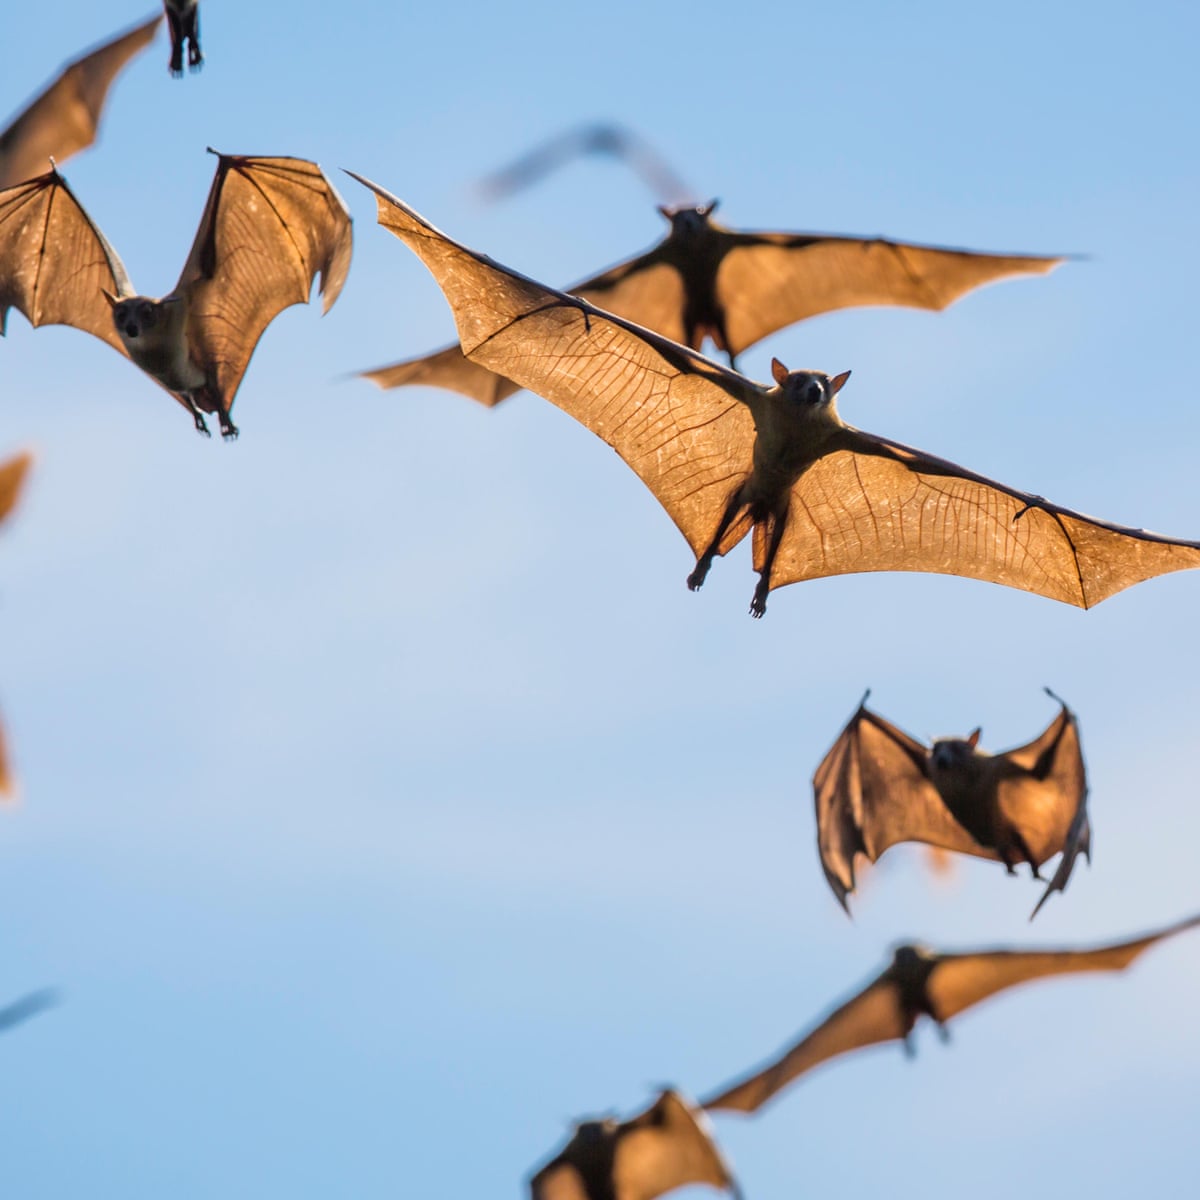 Bats are the death metal singers of the animal world, research shows |  Science | The Guardian